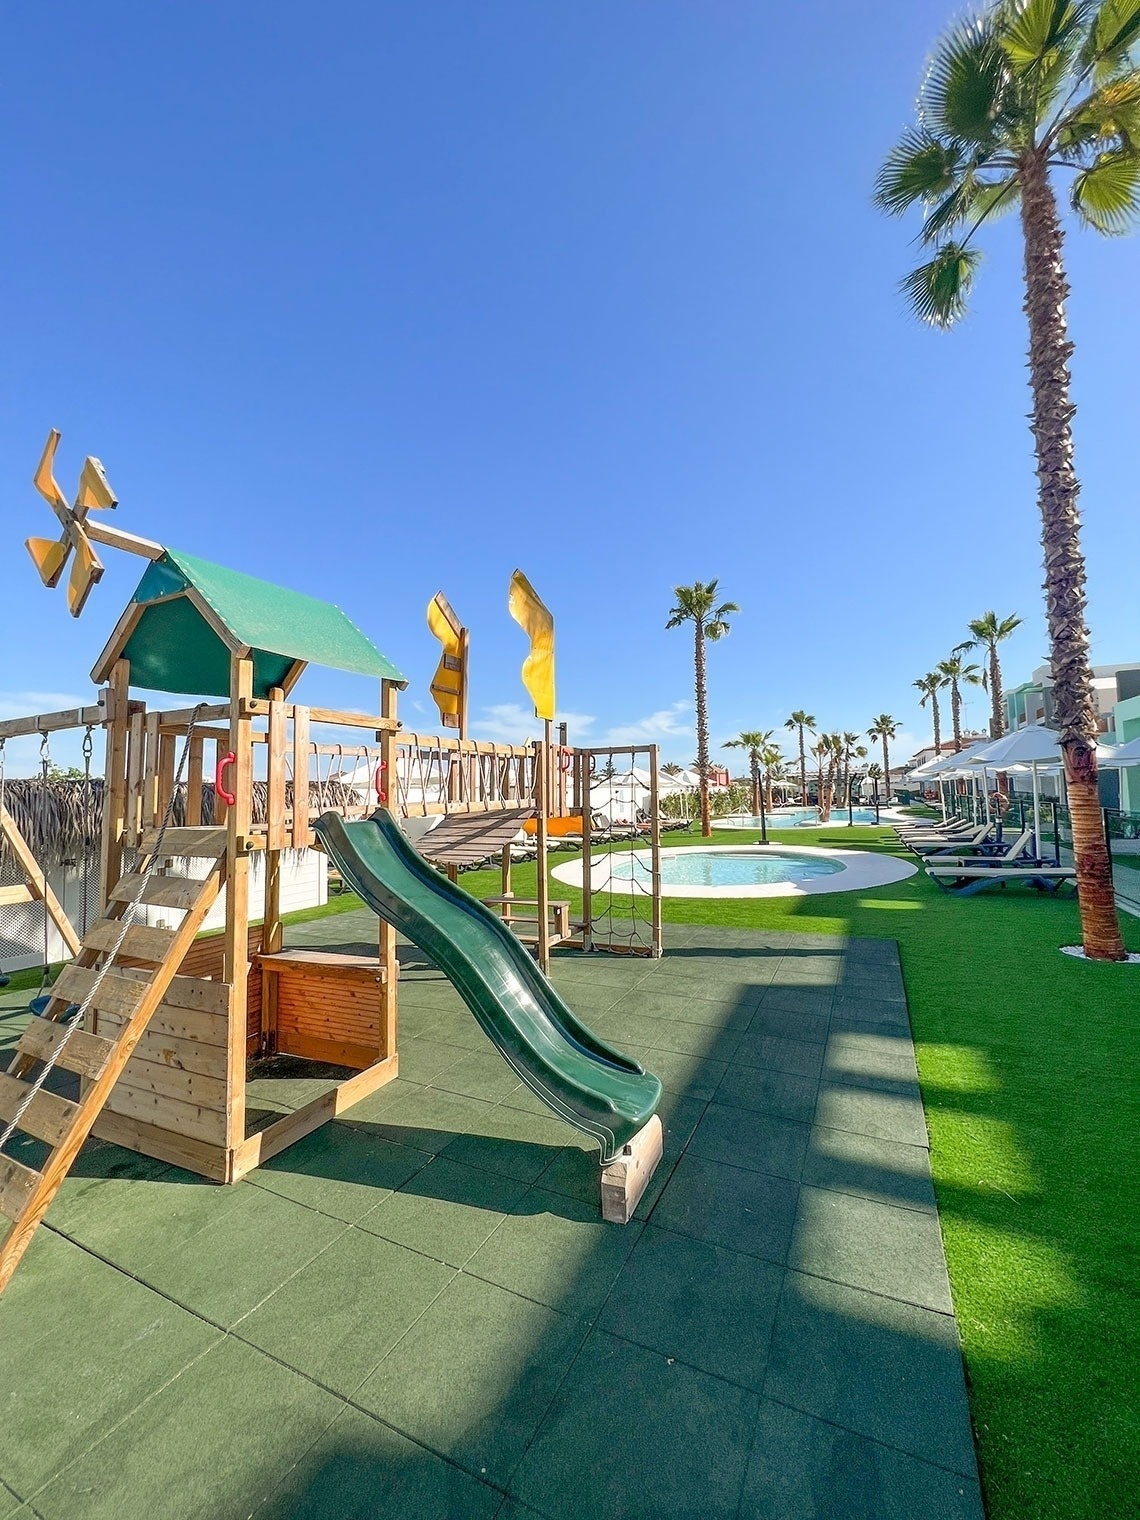 a playground with a green slide and a windmill